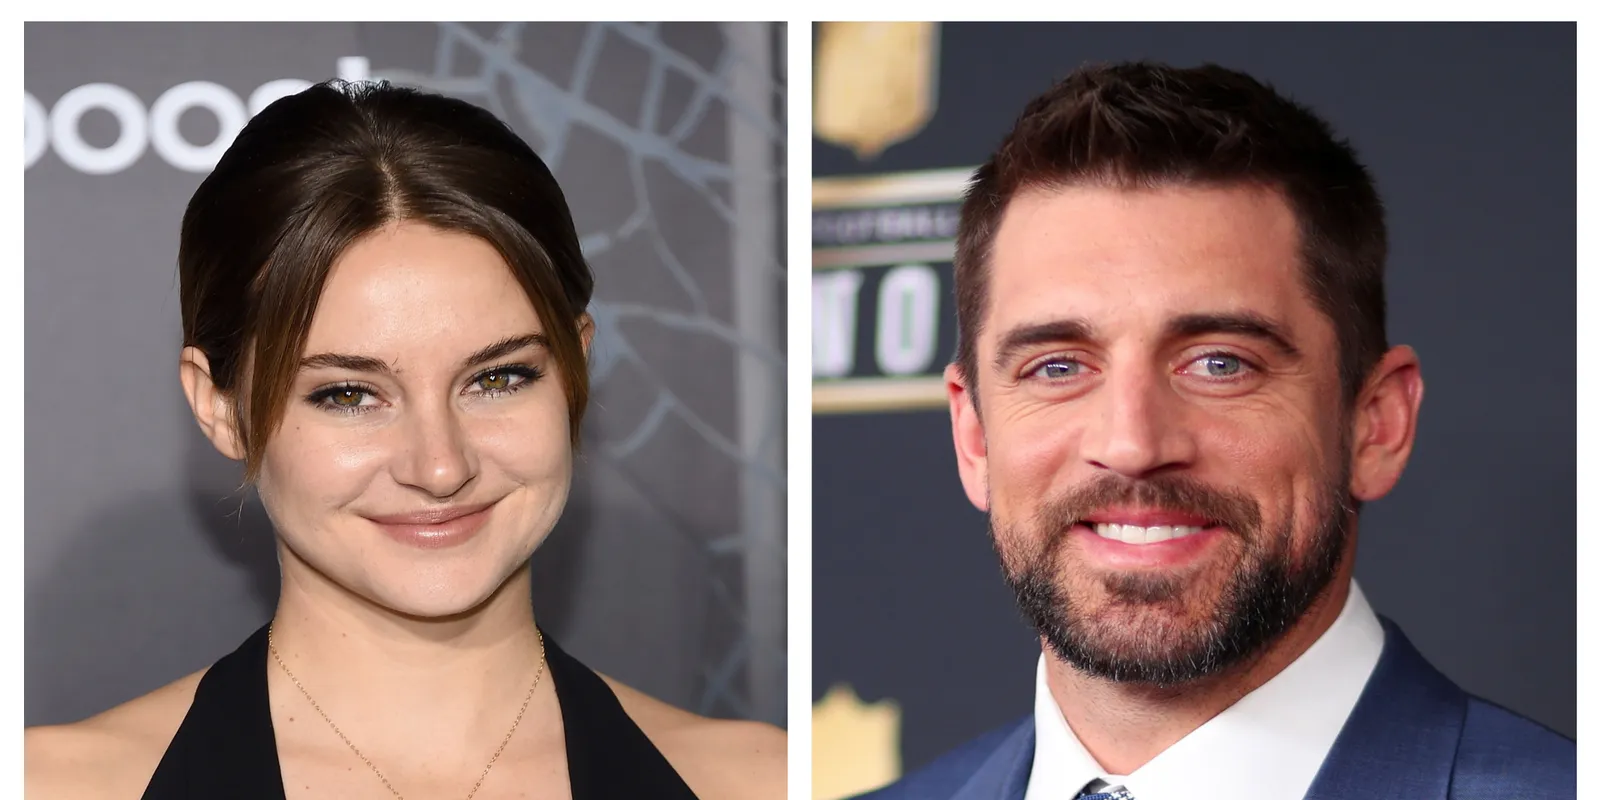 How Old is Aaron Rodgers’ Wife? Shailene Woodley Family, Age, Dating History